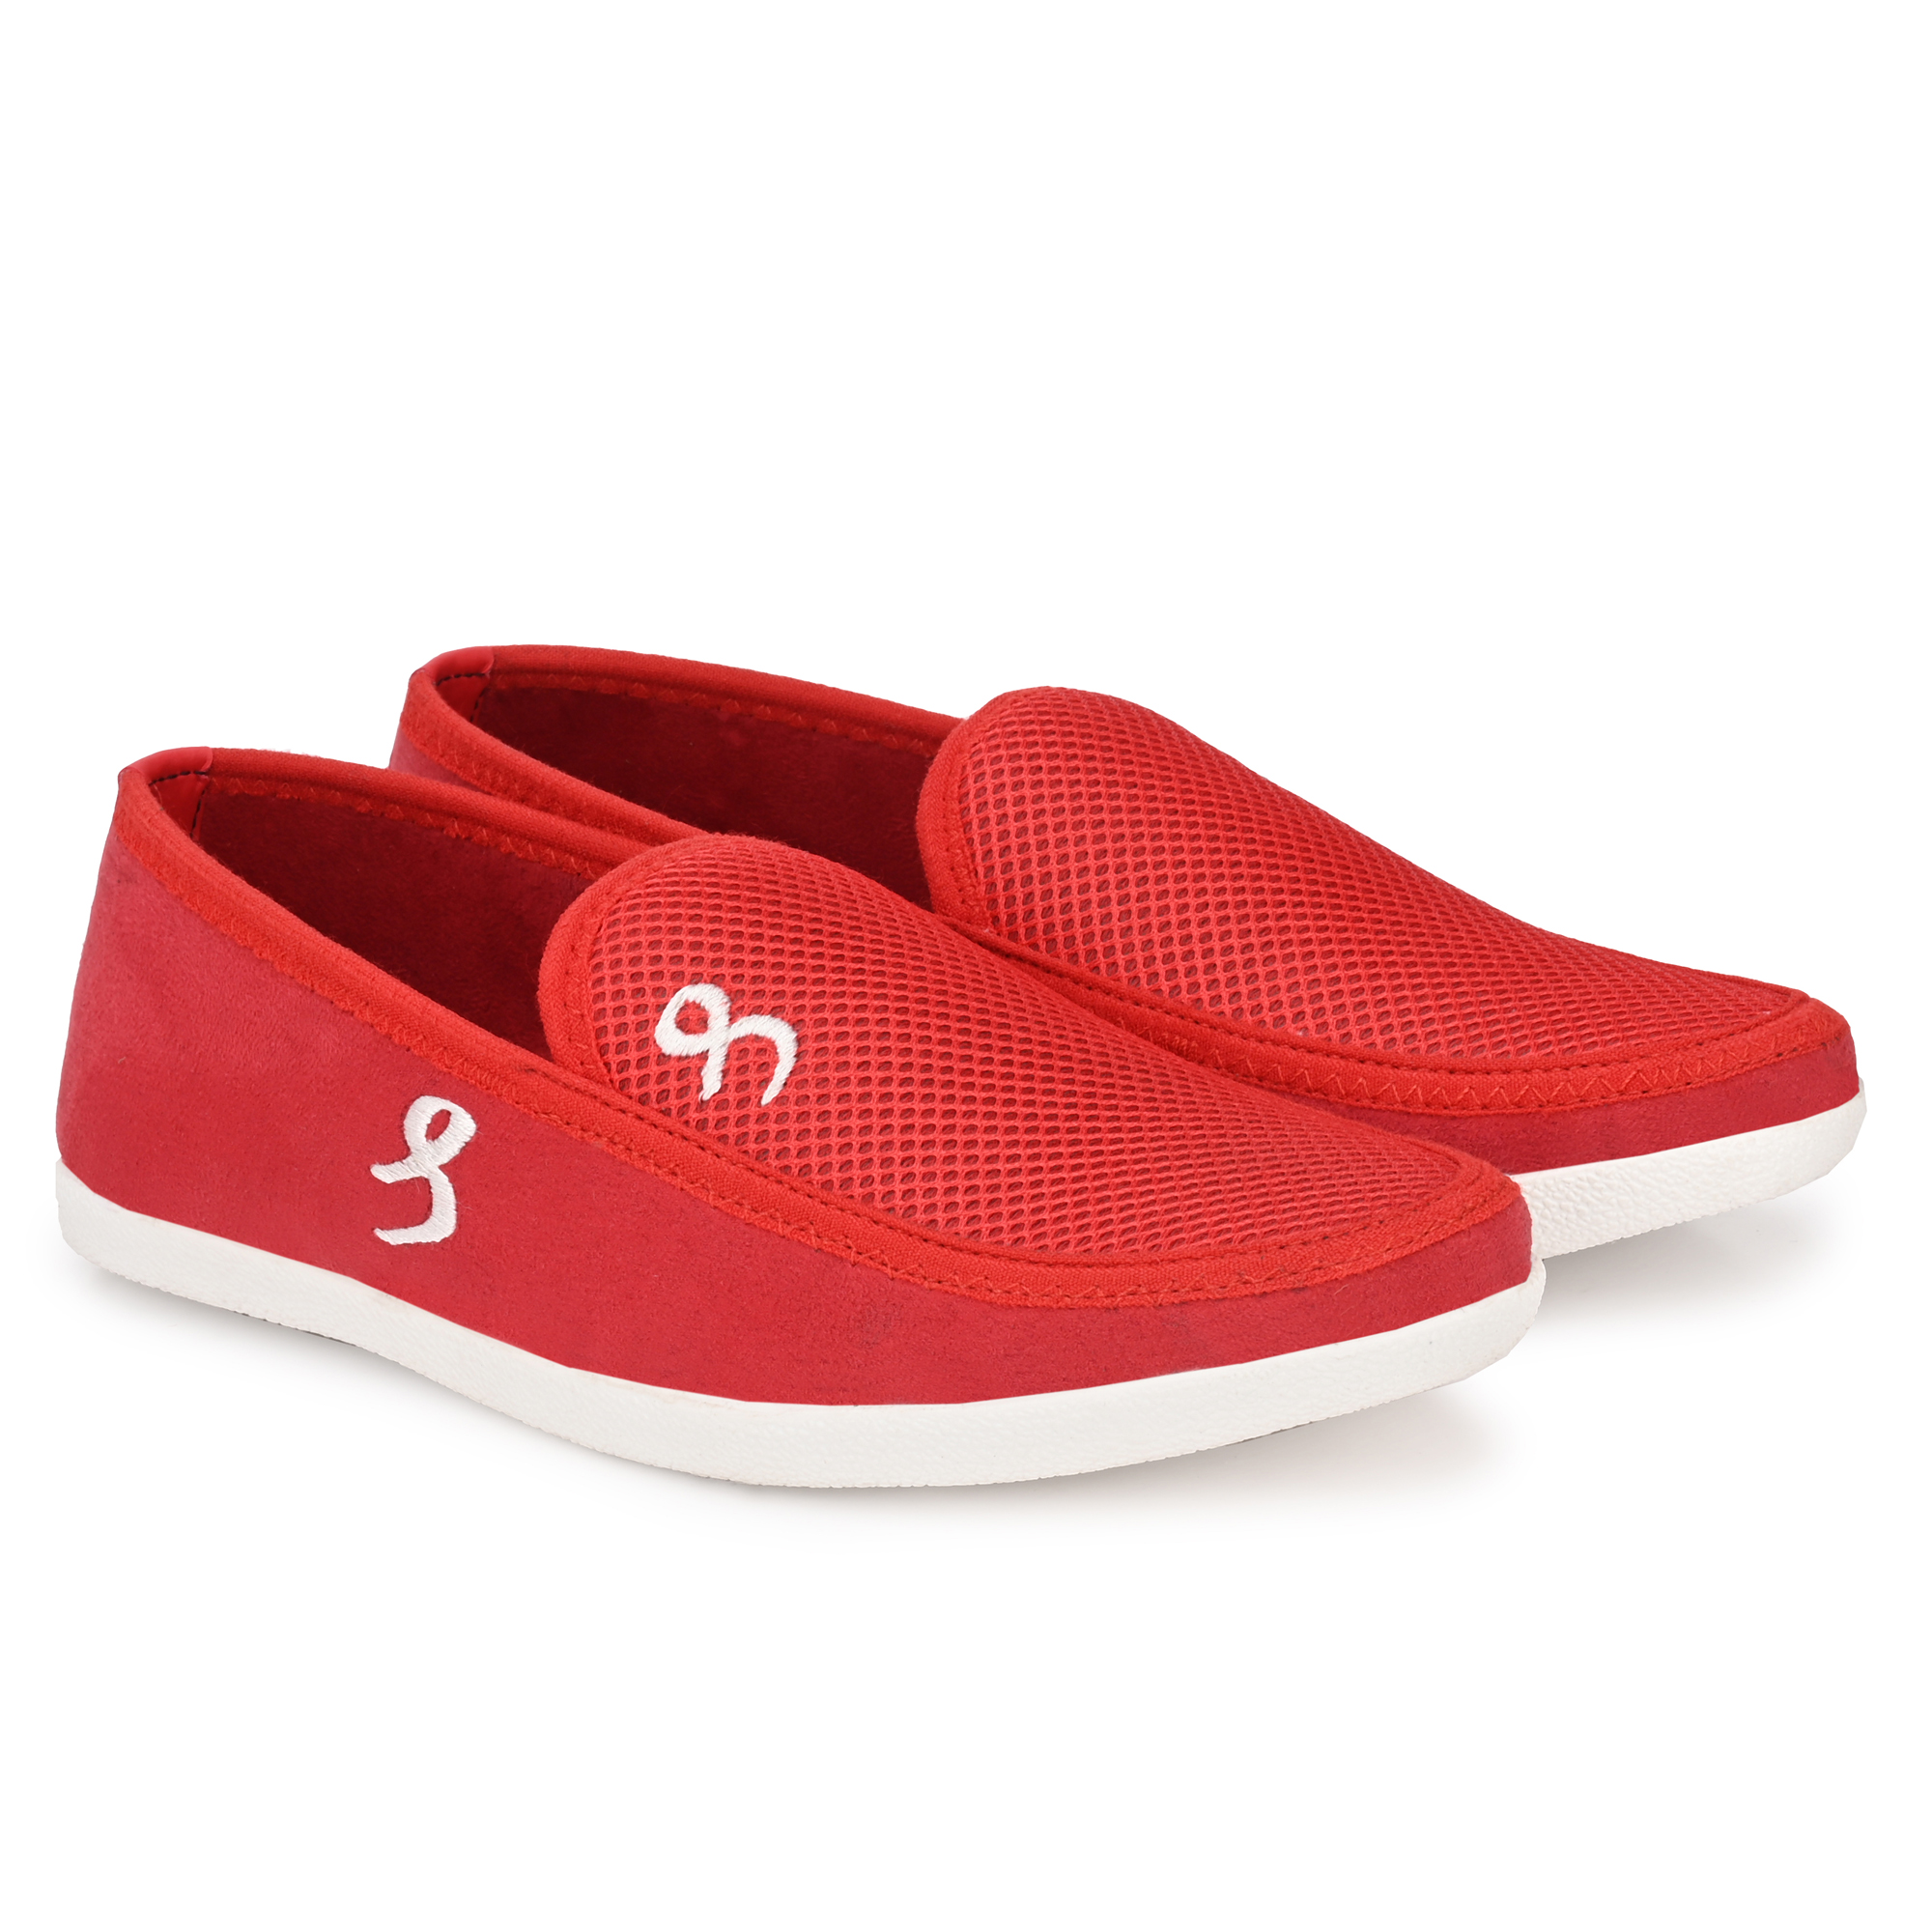 Buy Badlav Red Charanpaduka Loafer Online @ ₹499 from ShopClues